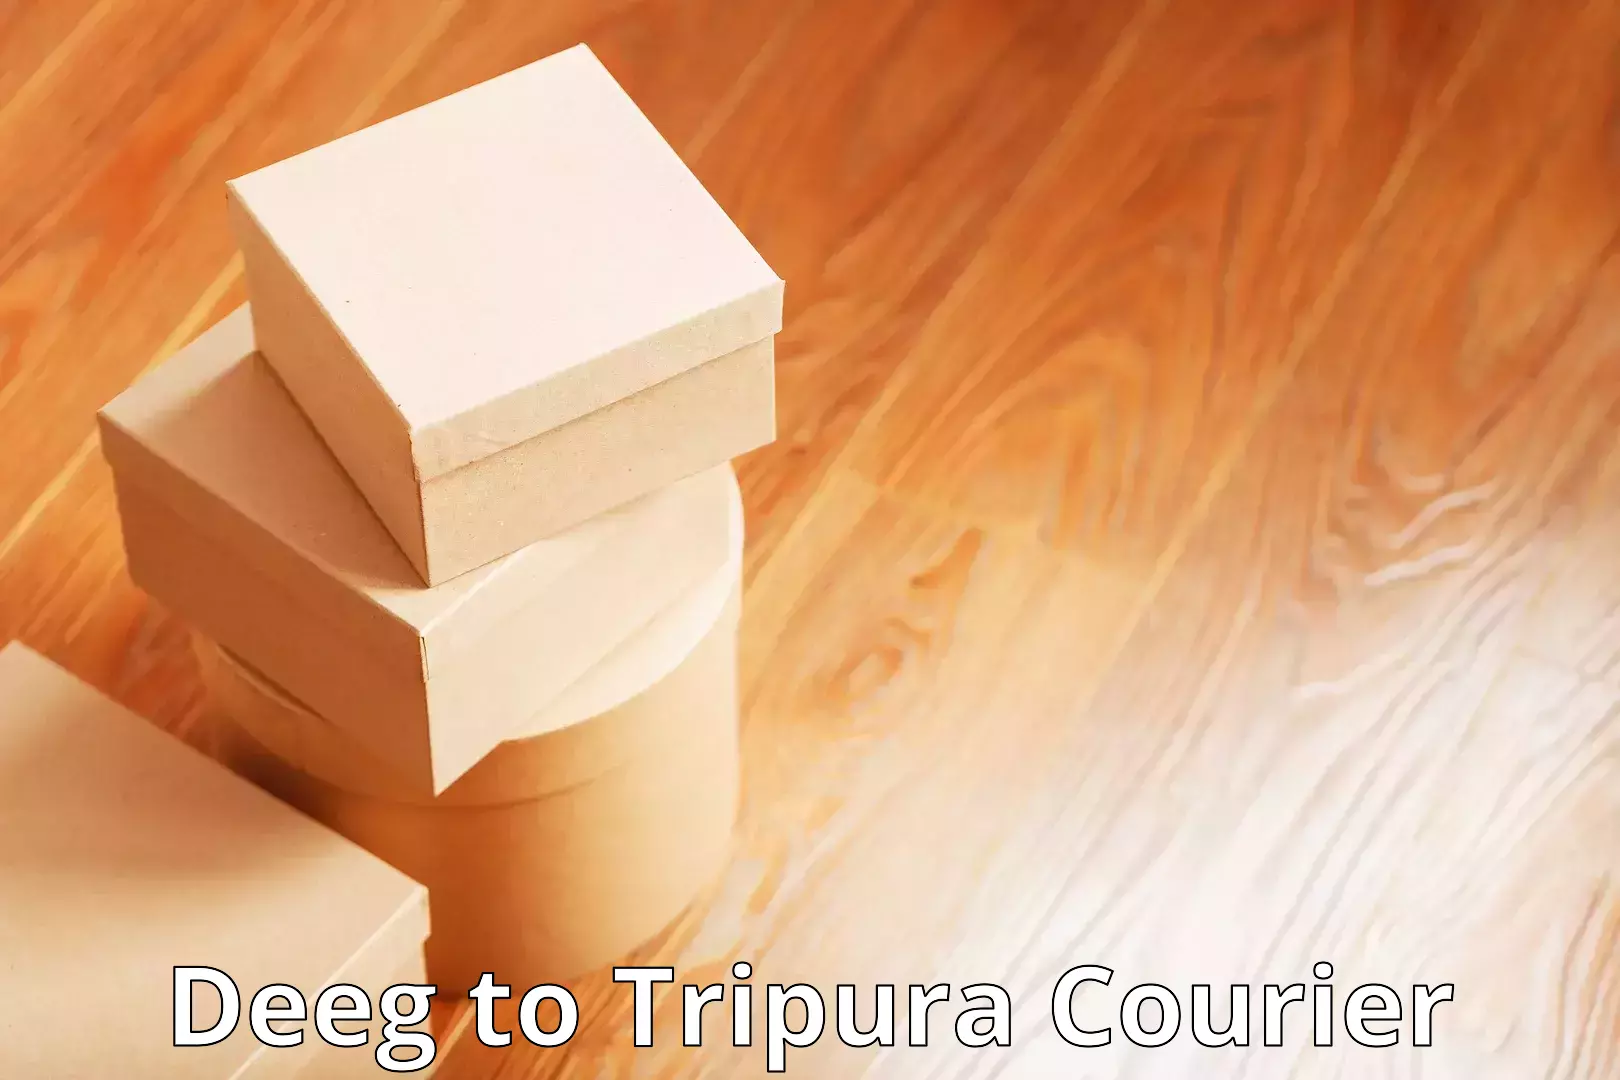 Cargo delivery service Deeg to Tripura